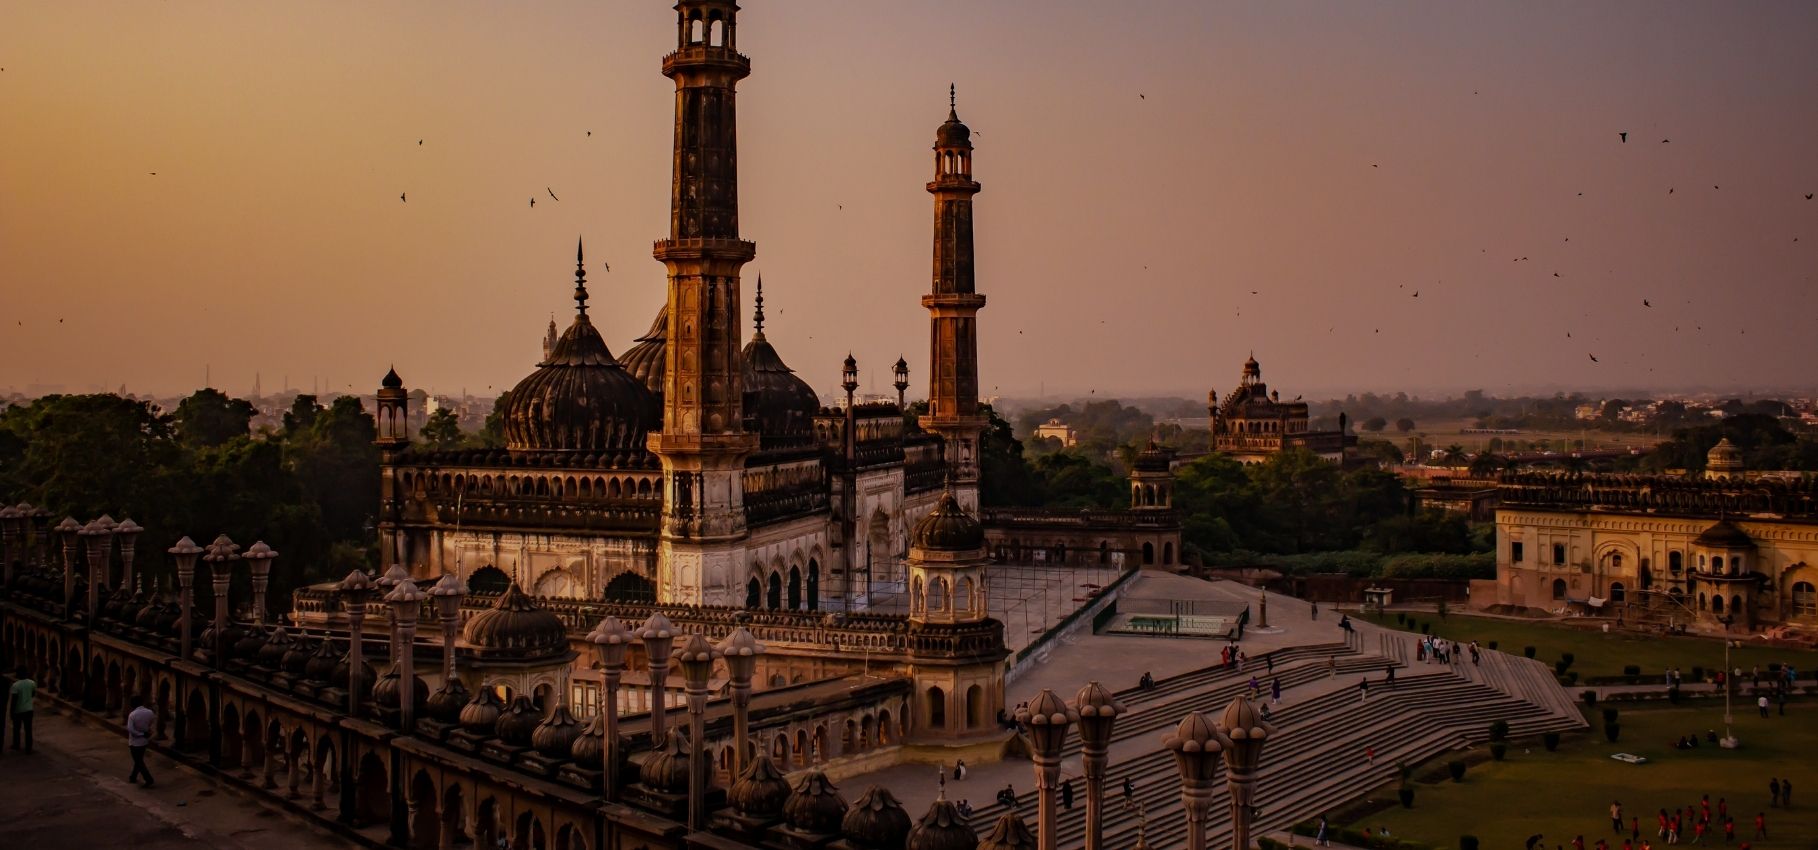 Things to do in Lucknow - Tourism, Food and Shopping